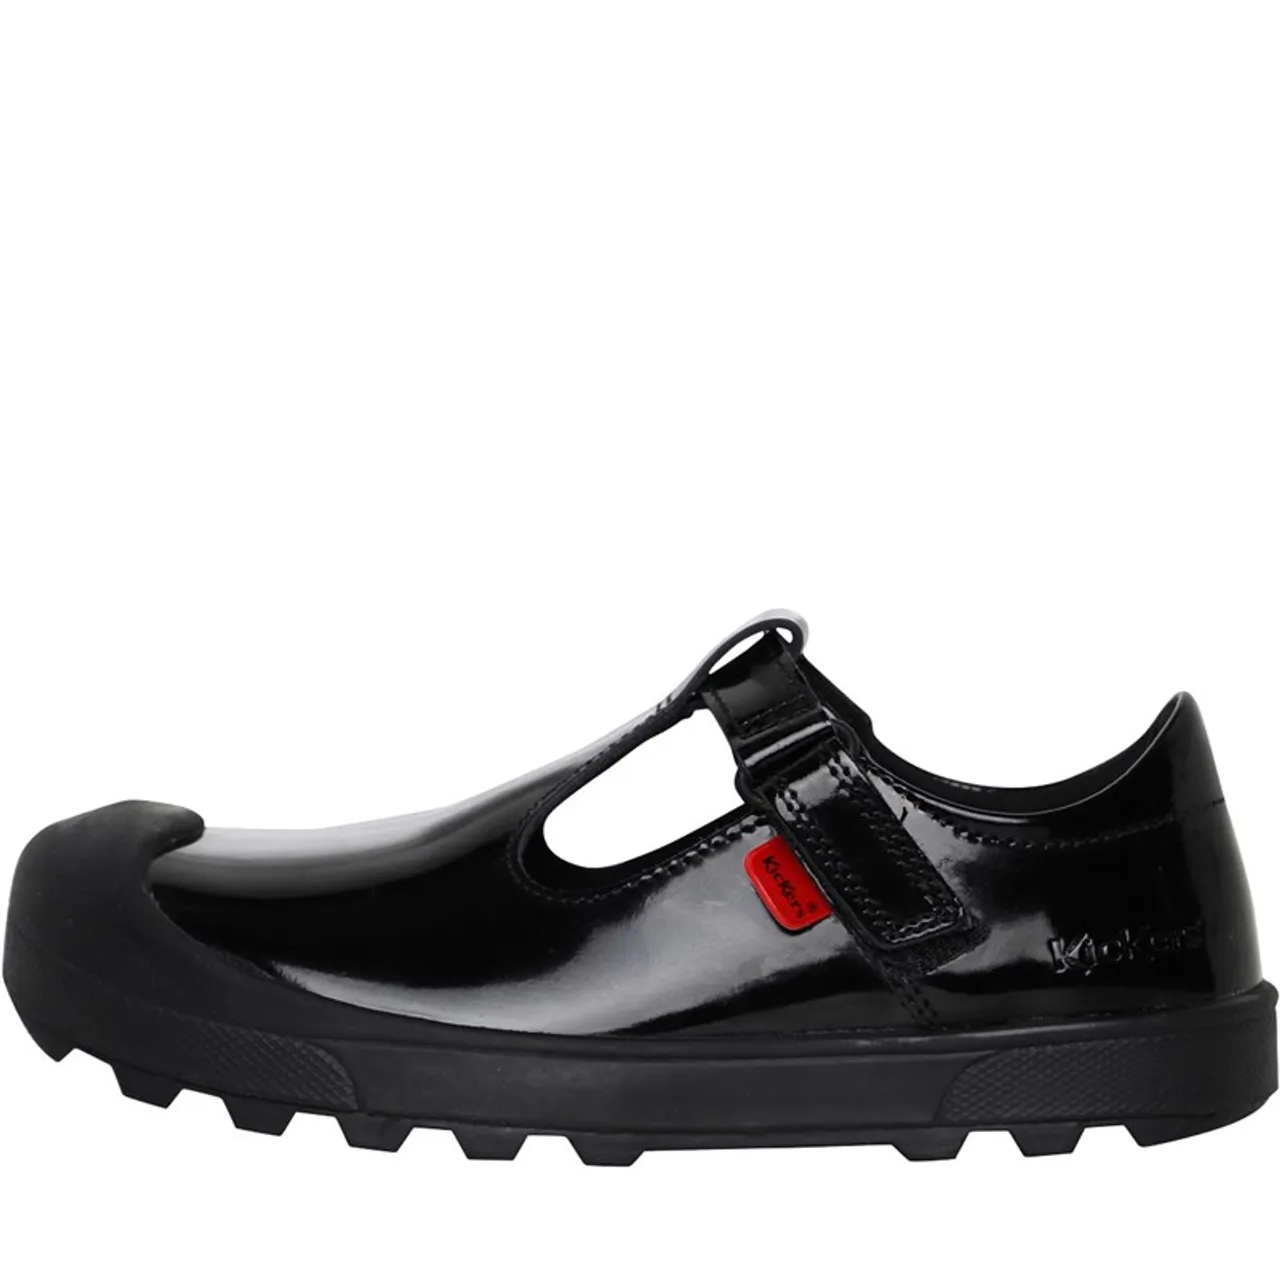 Kickers Infant Girls Back To School Plunk Patent Leather Shoes Black